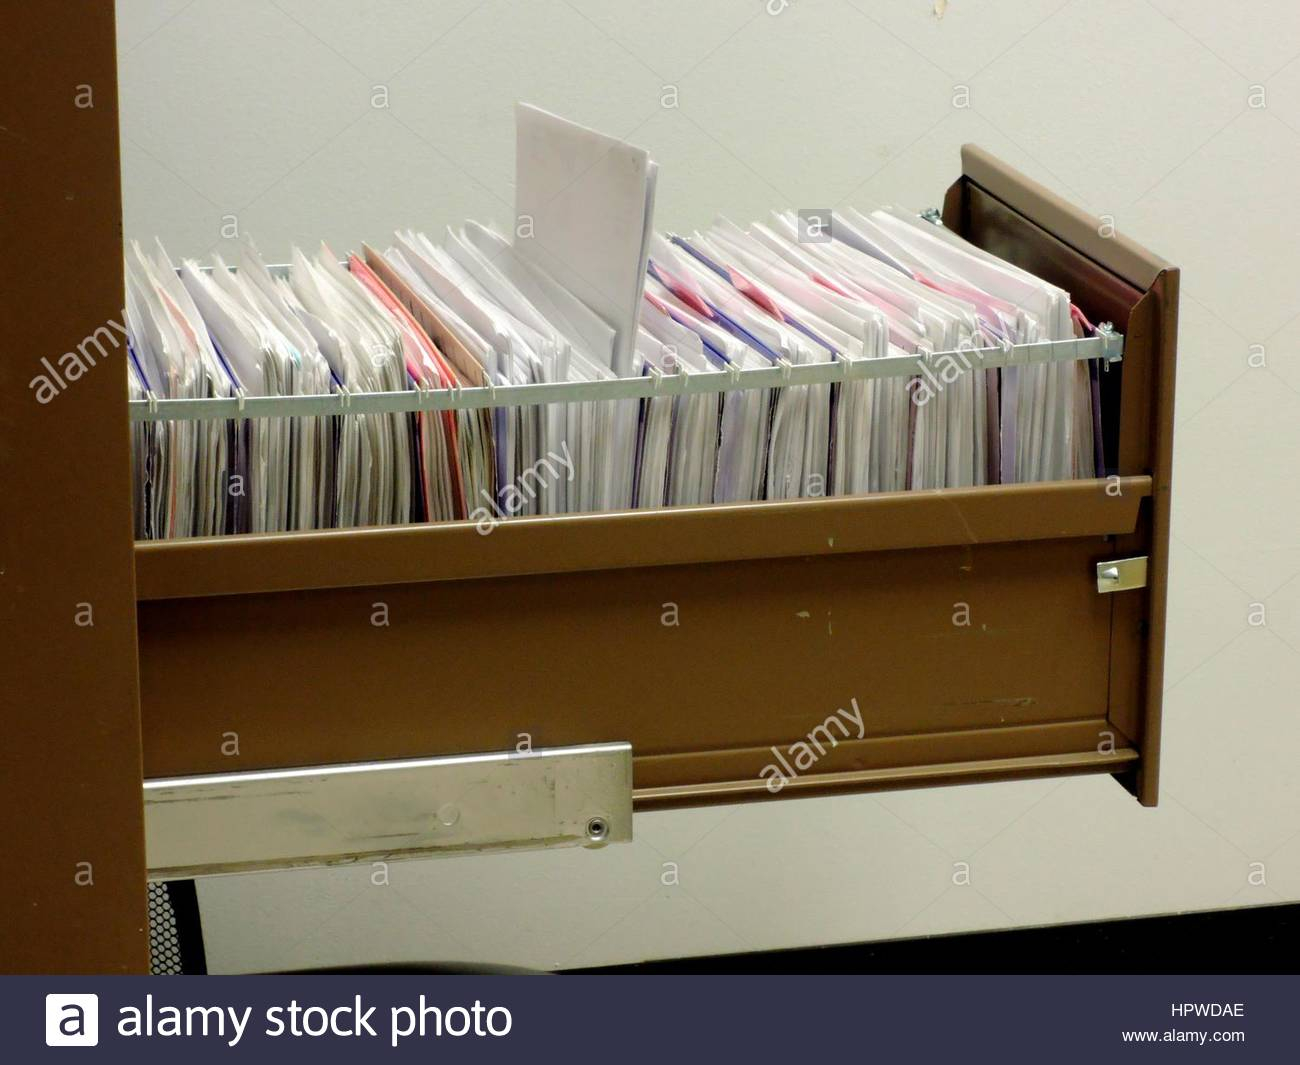 Metal File Cabinet With Hanging File Folders Stock Photo 134554294 pertaining to measurements 1300 X 1065